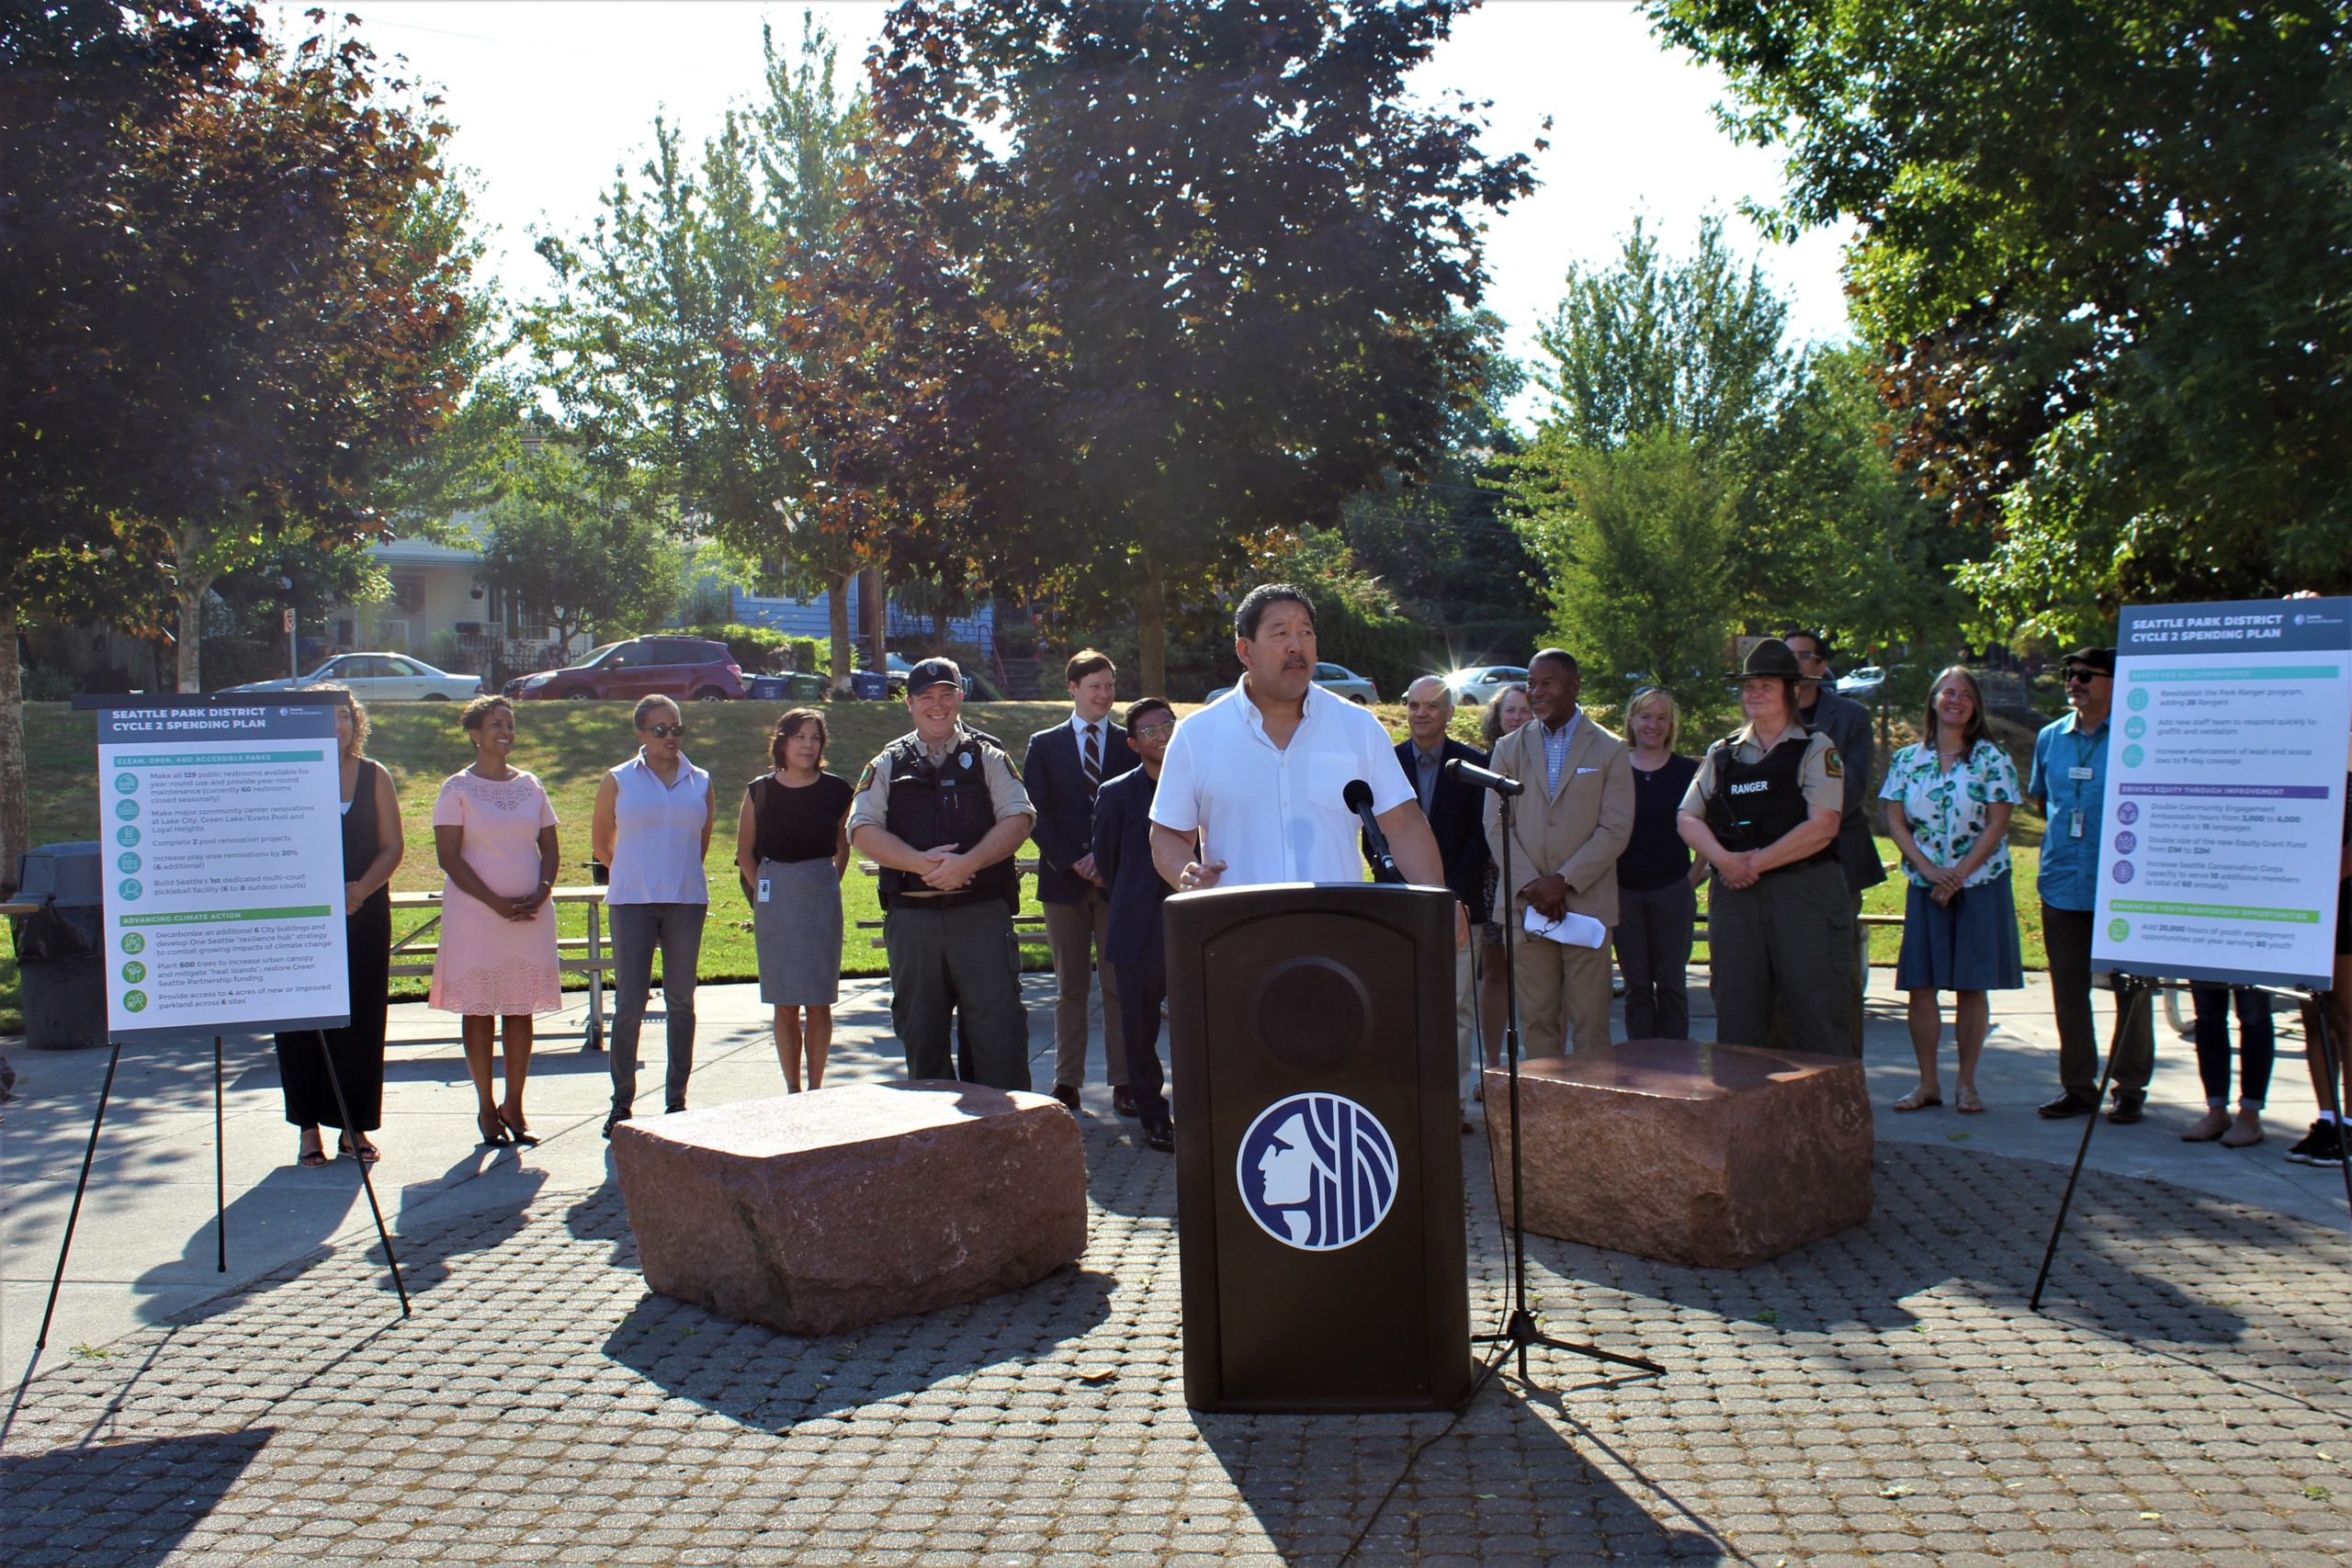 Mayor Harrell stands behind a podium at Rainier Playfield with a staff behind him.